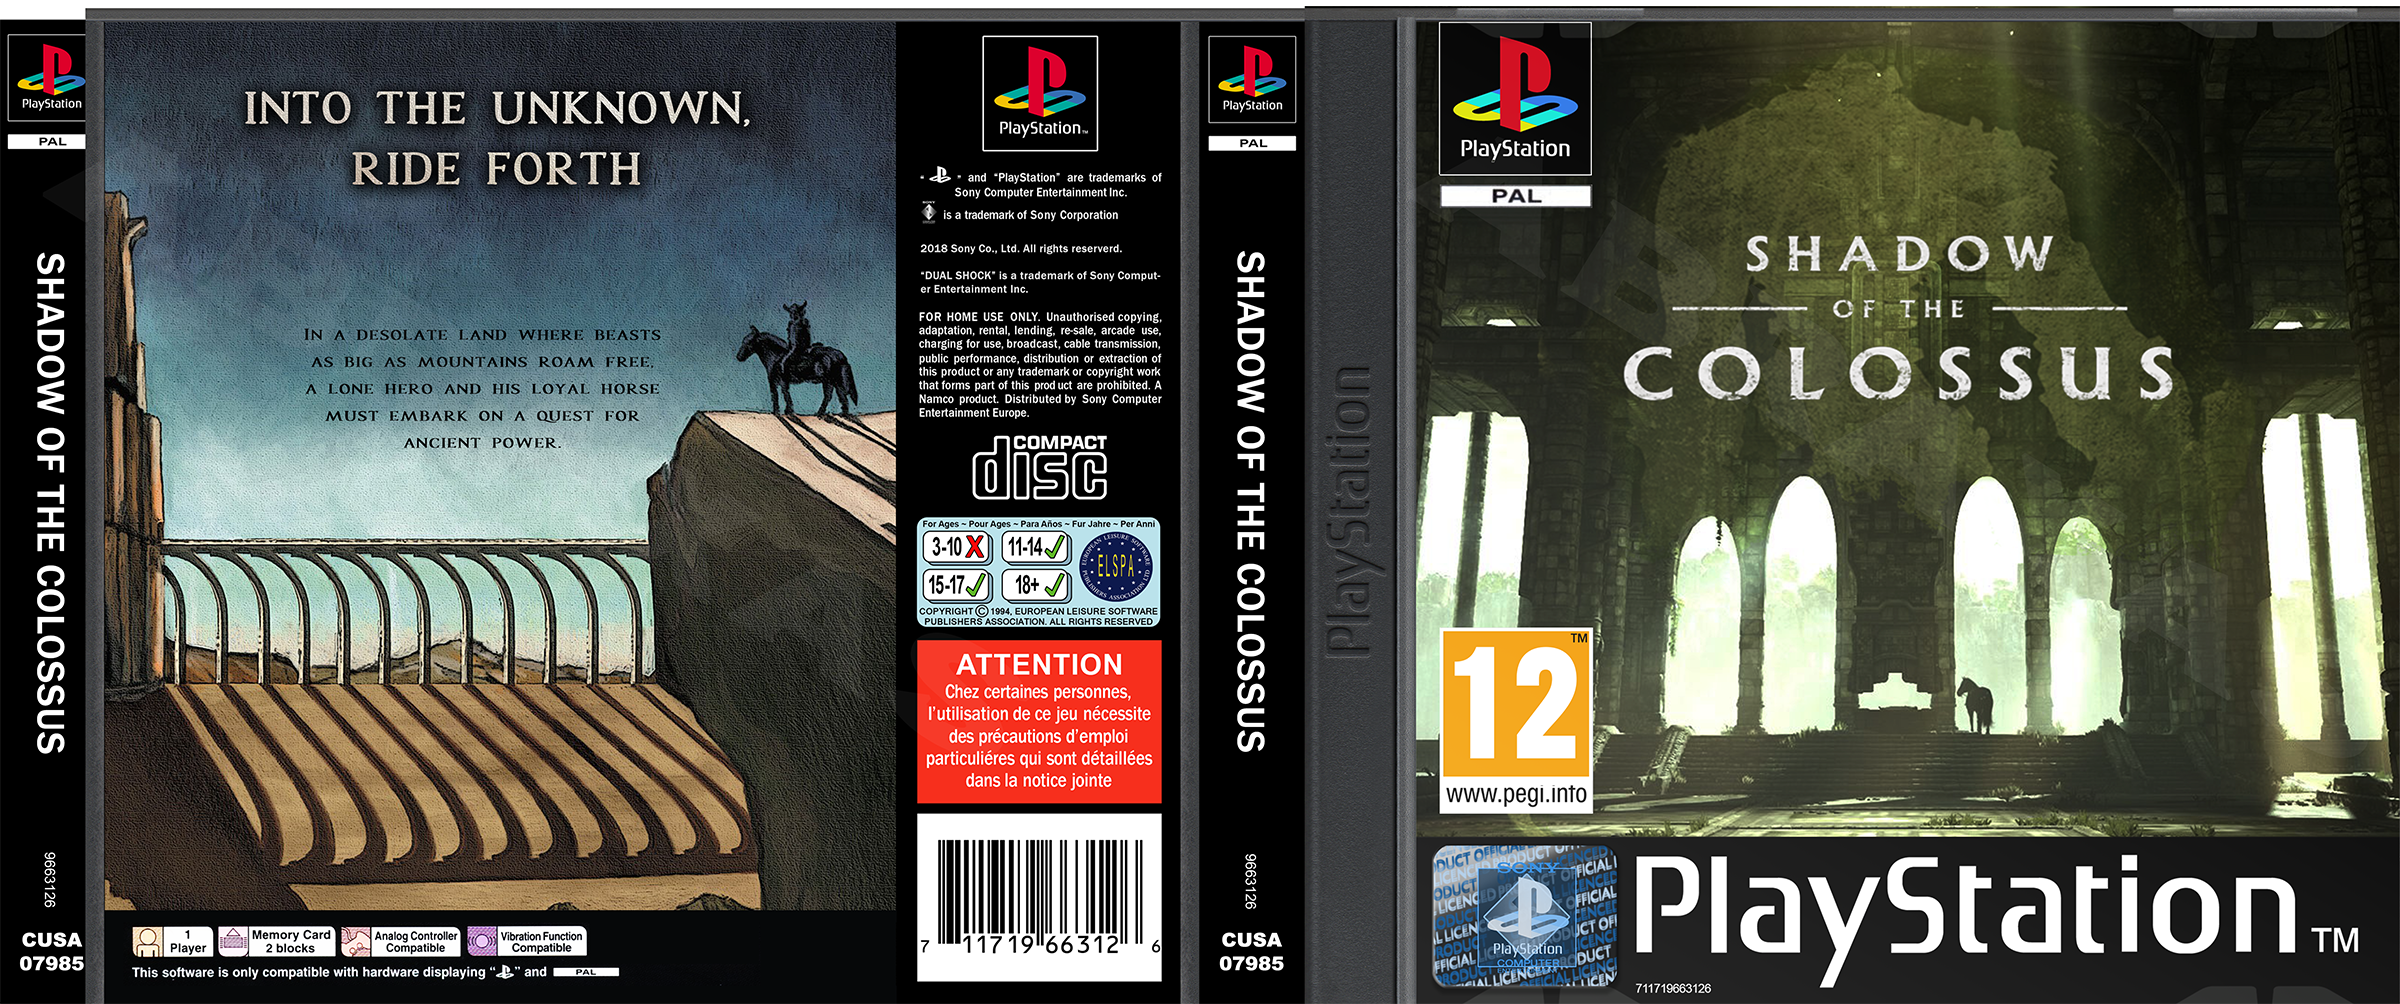 Shadow Of The Colossus (2018) - PS1 Custom box cover